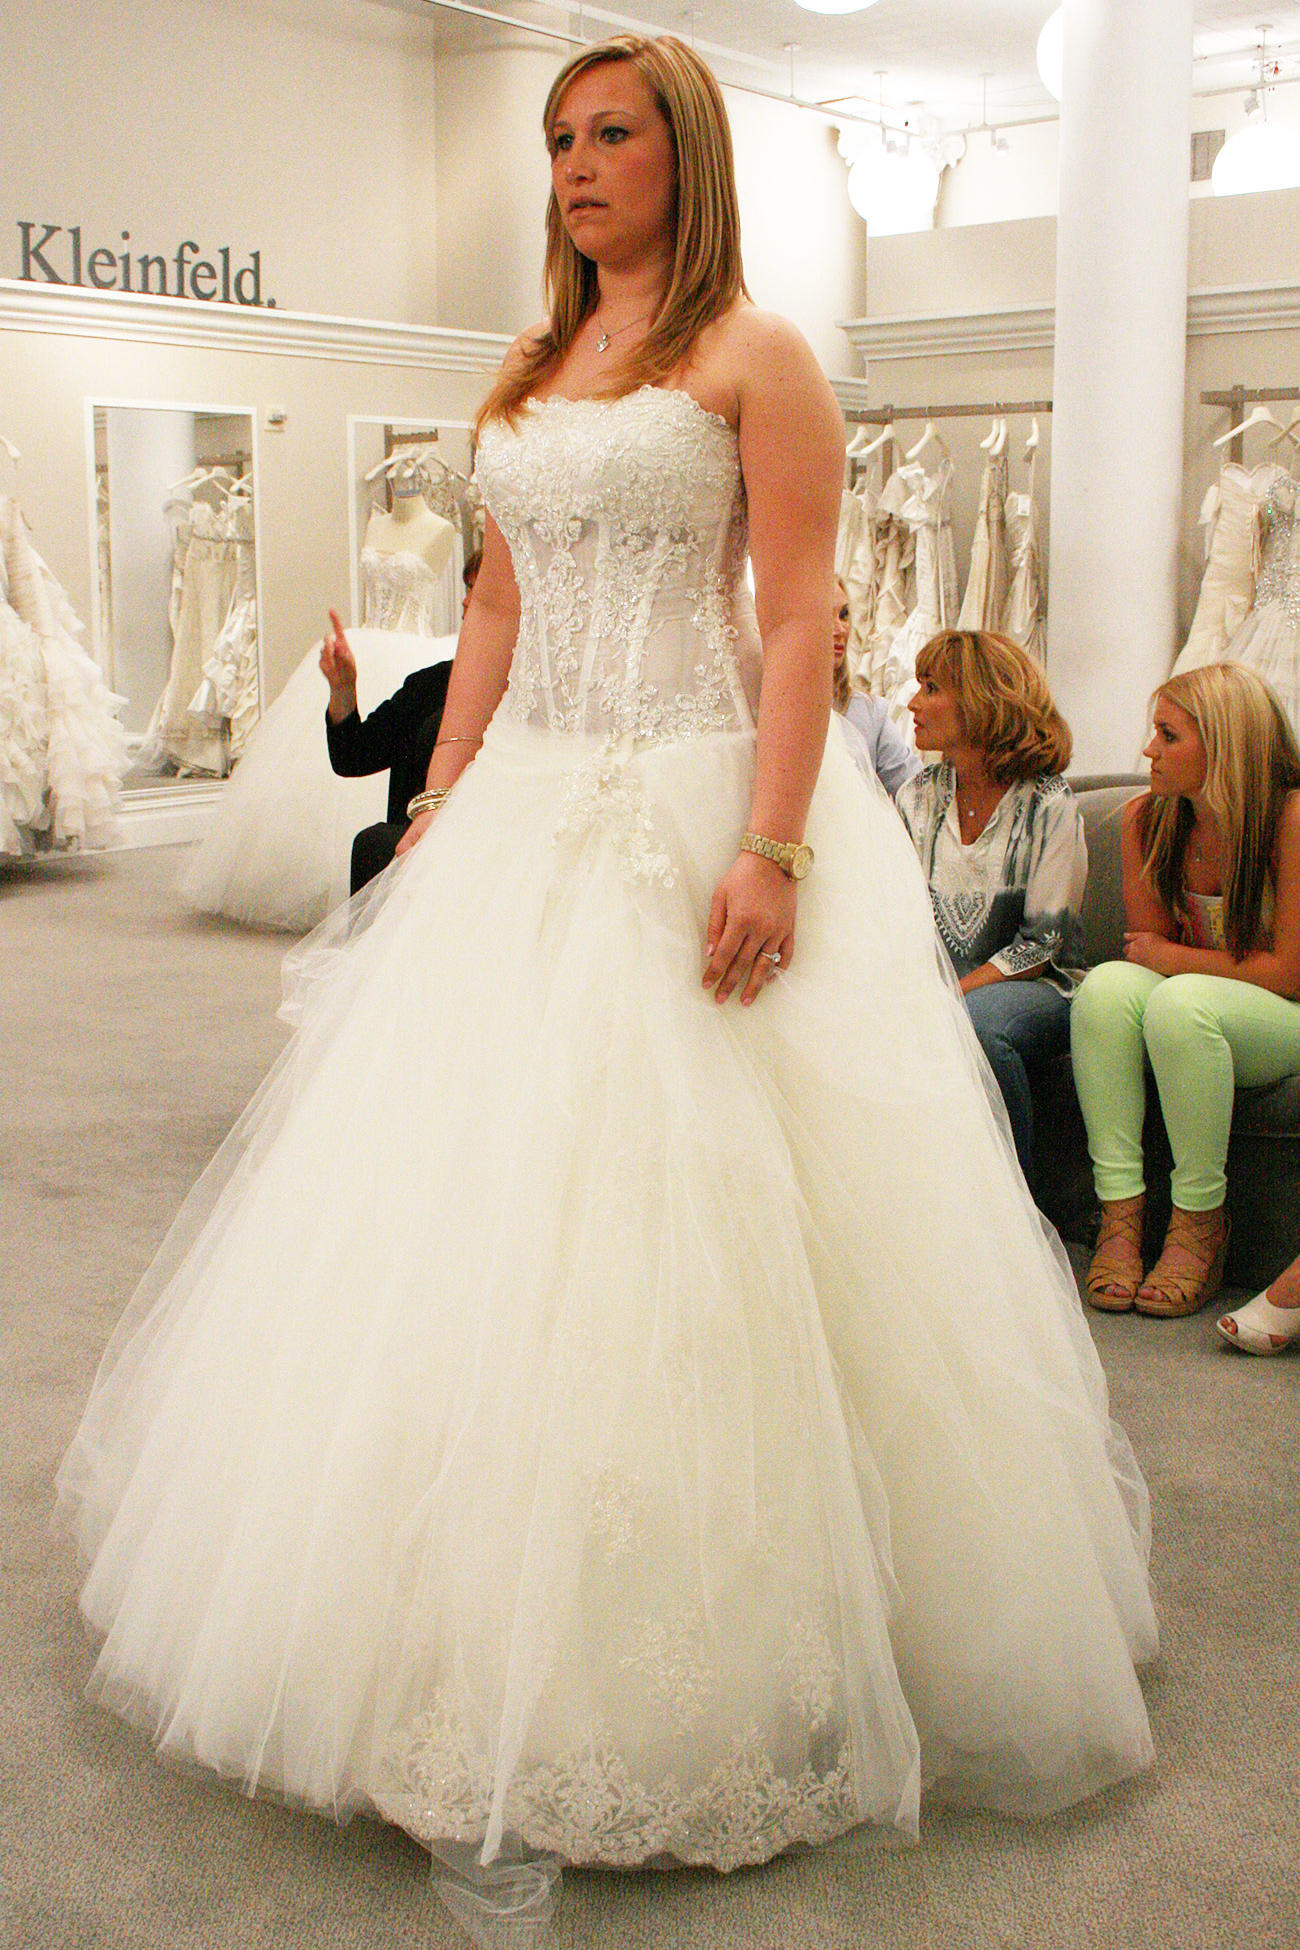 Season 11 Featured Wedding Dresses, Part 8 Say Yes to the Dress TLC